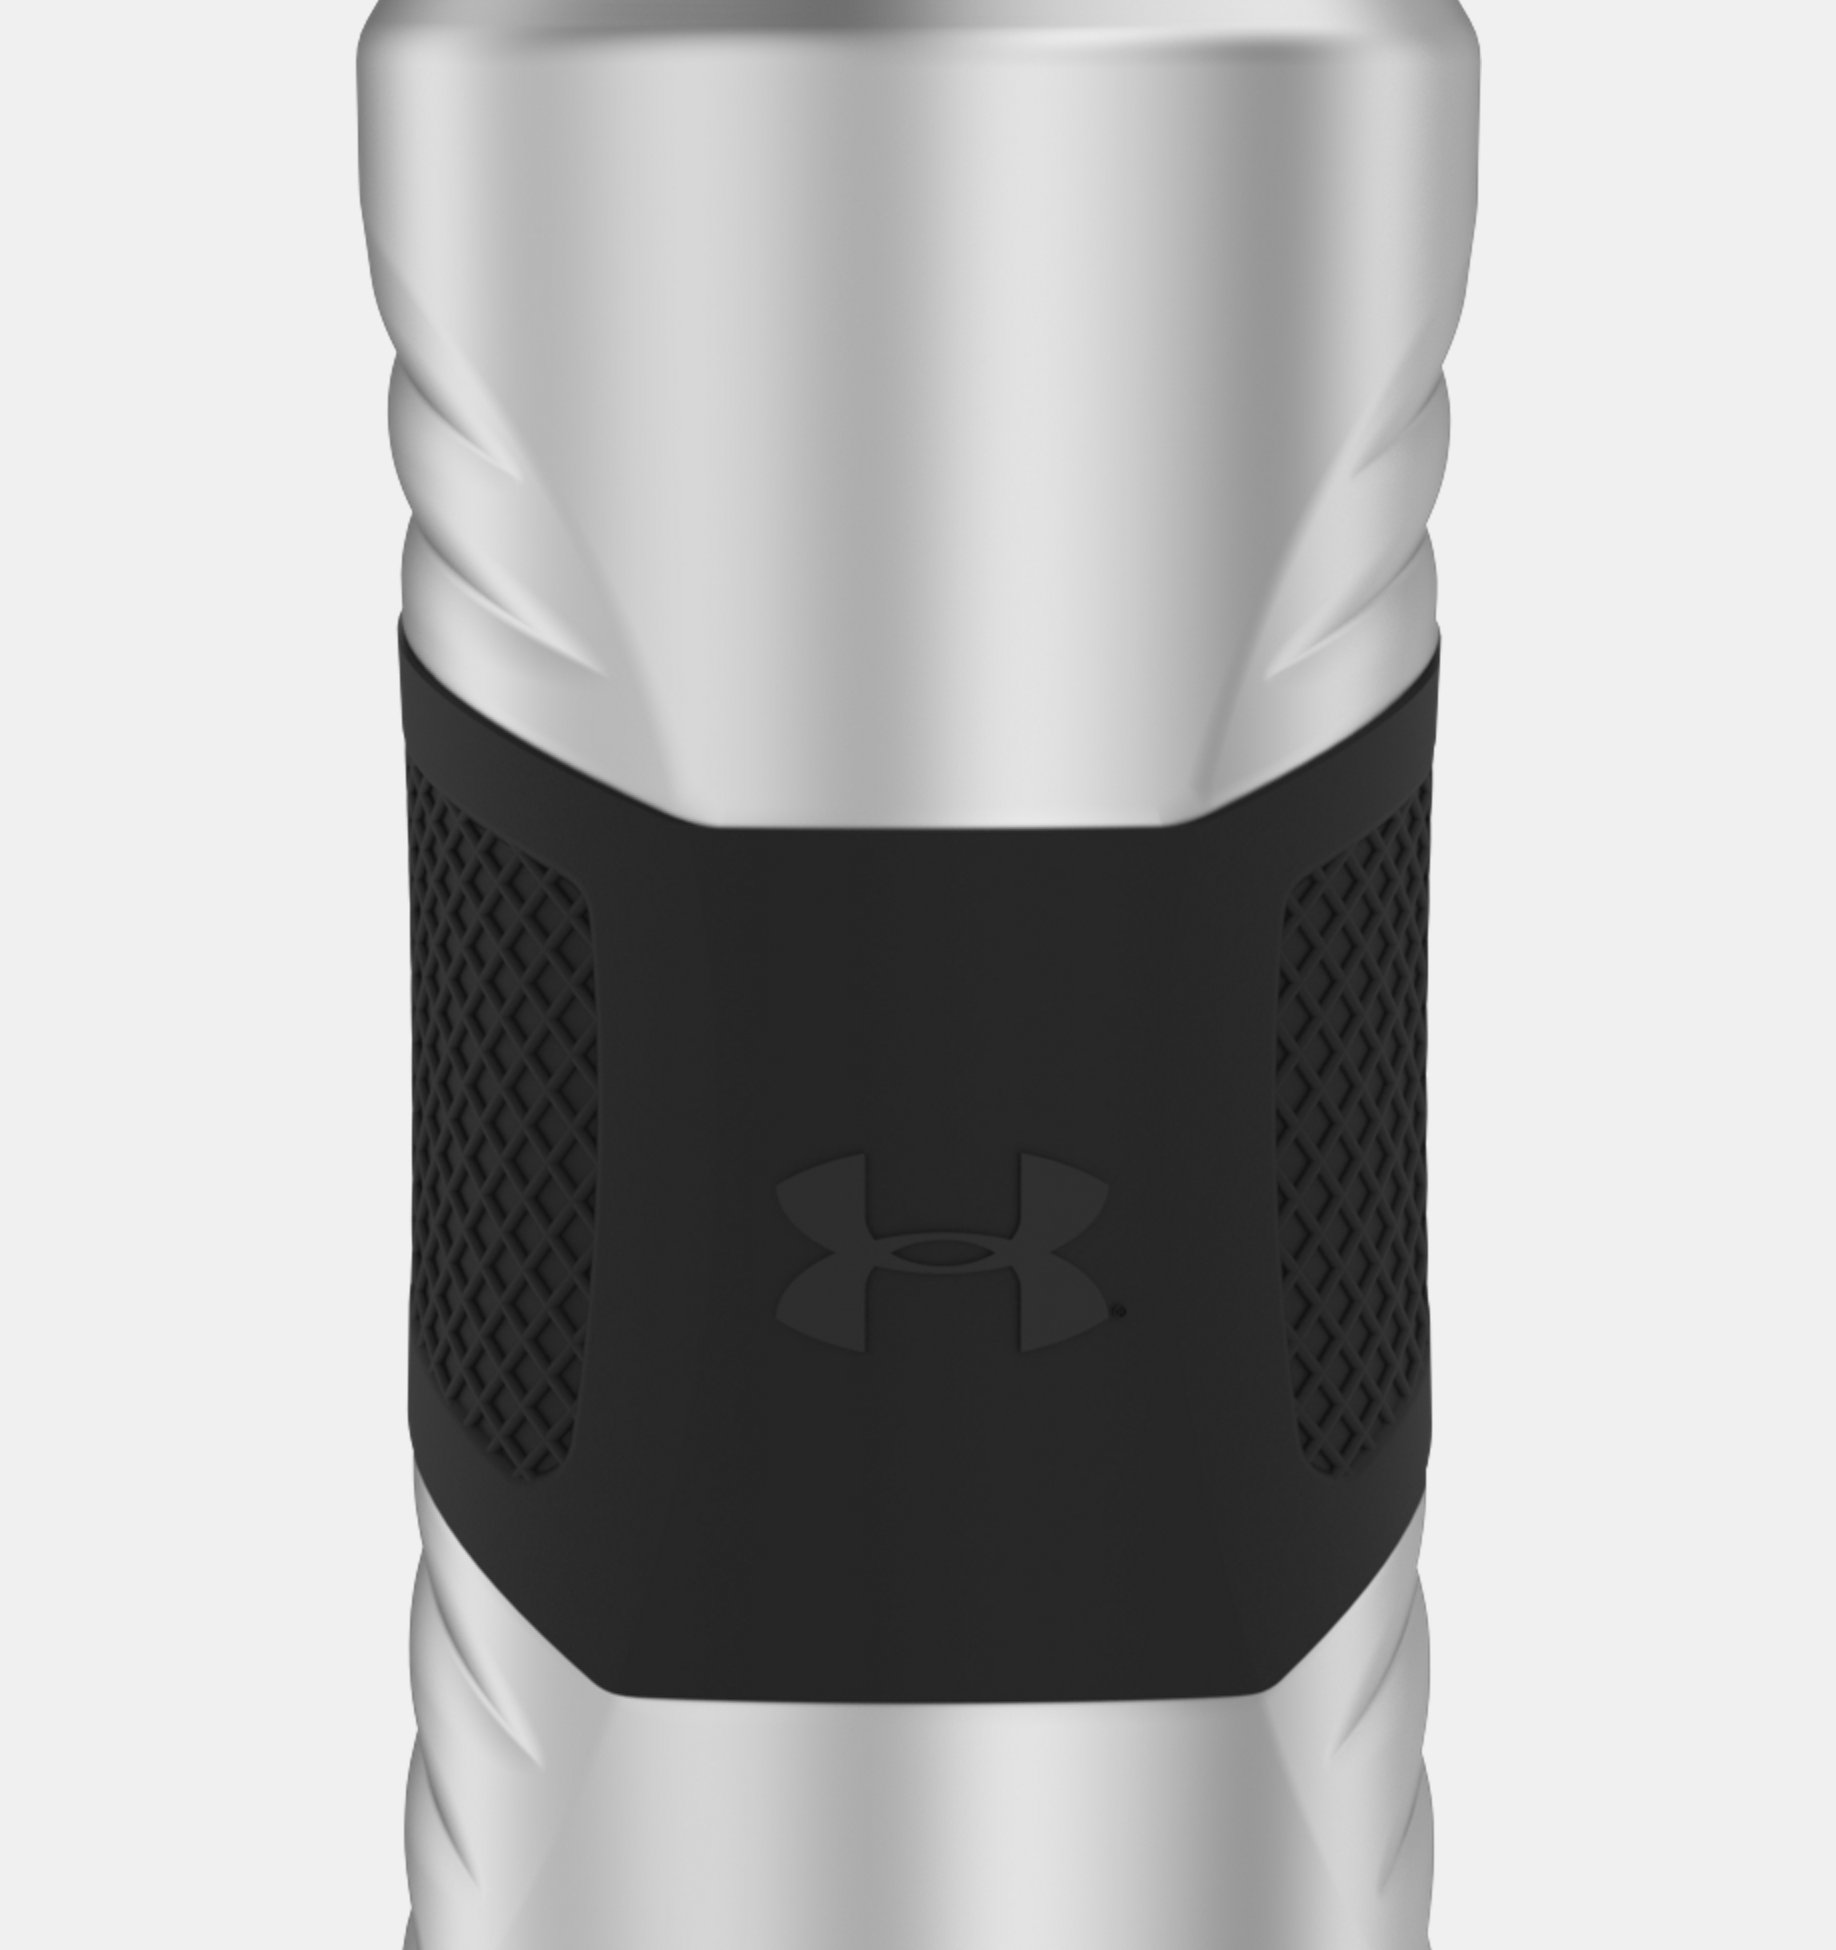 Dominate Stainless Steel Water Bottle, 24oz, Silicon Body Grip